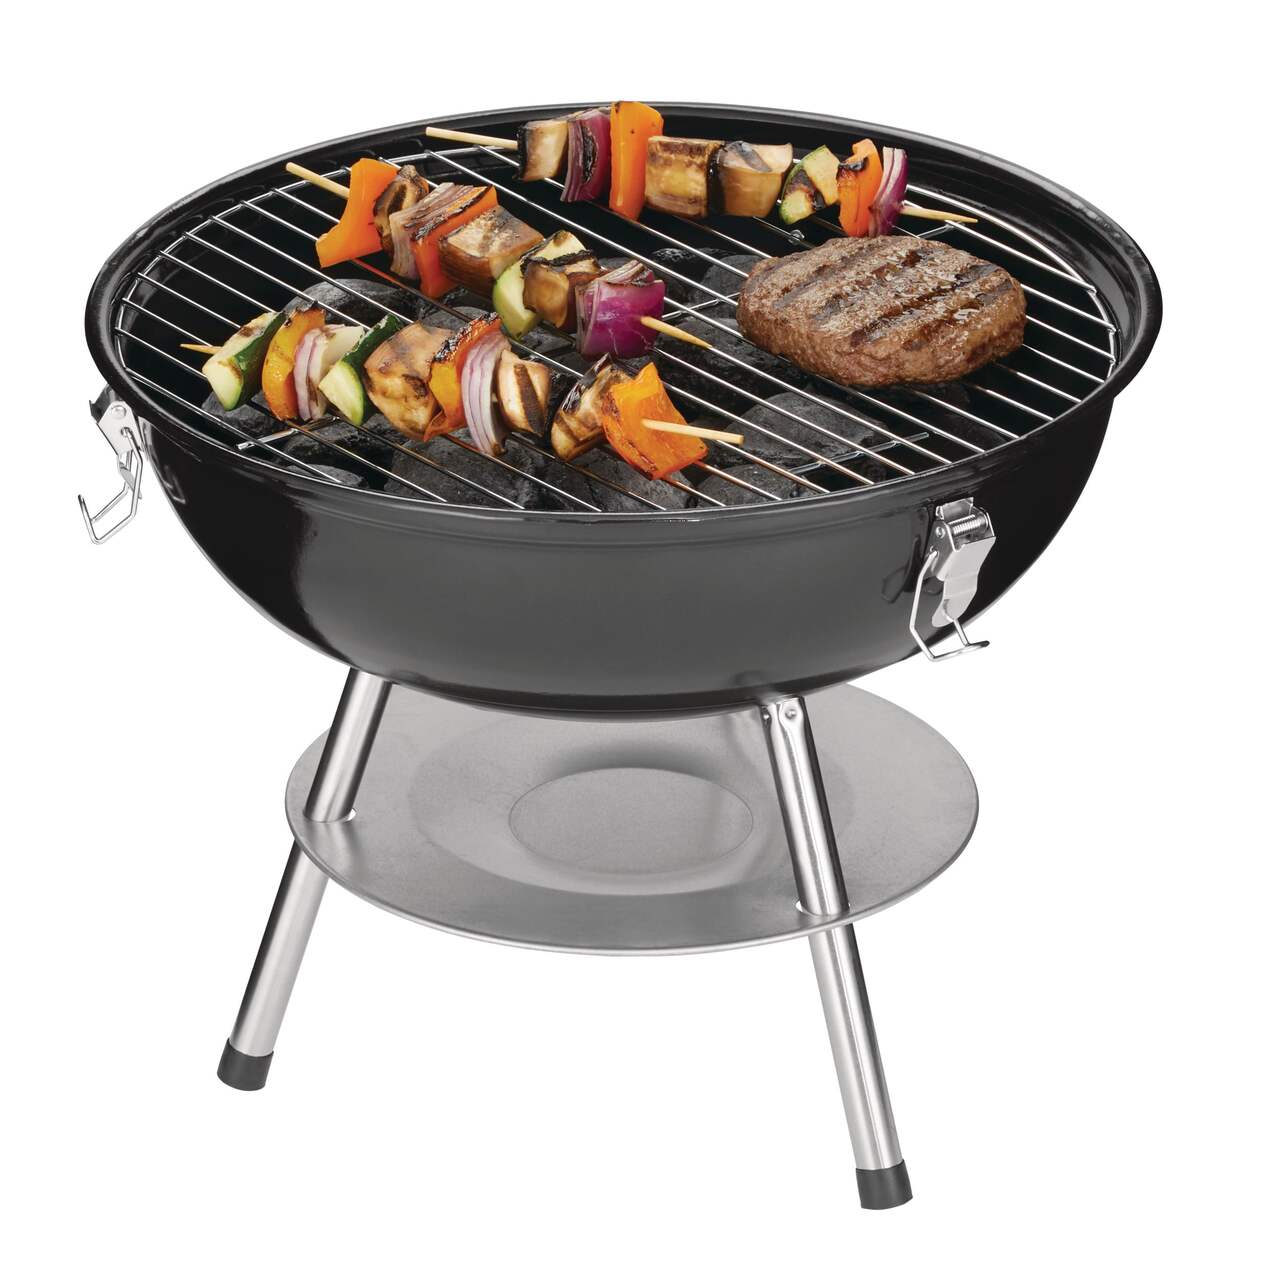 MASTER Chef Portable 14-In Charcoal Kettle BBQ Grill with a Folding Stand